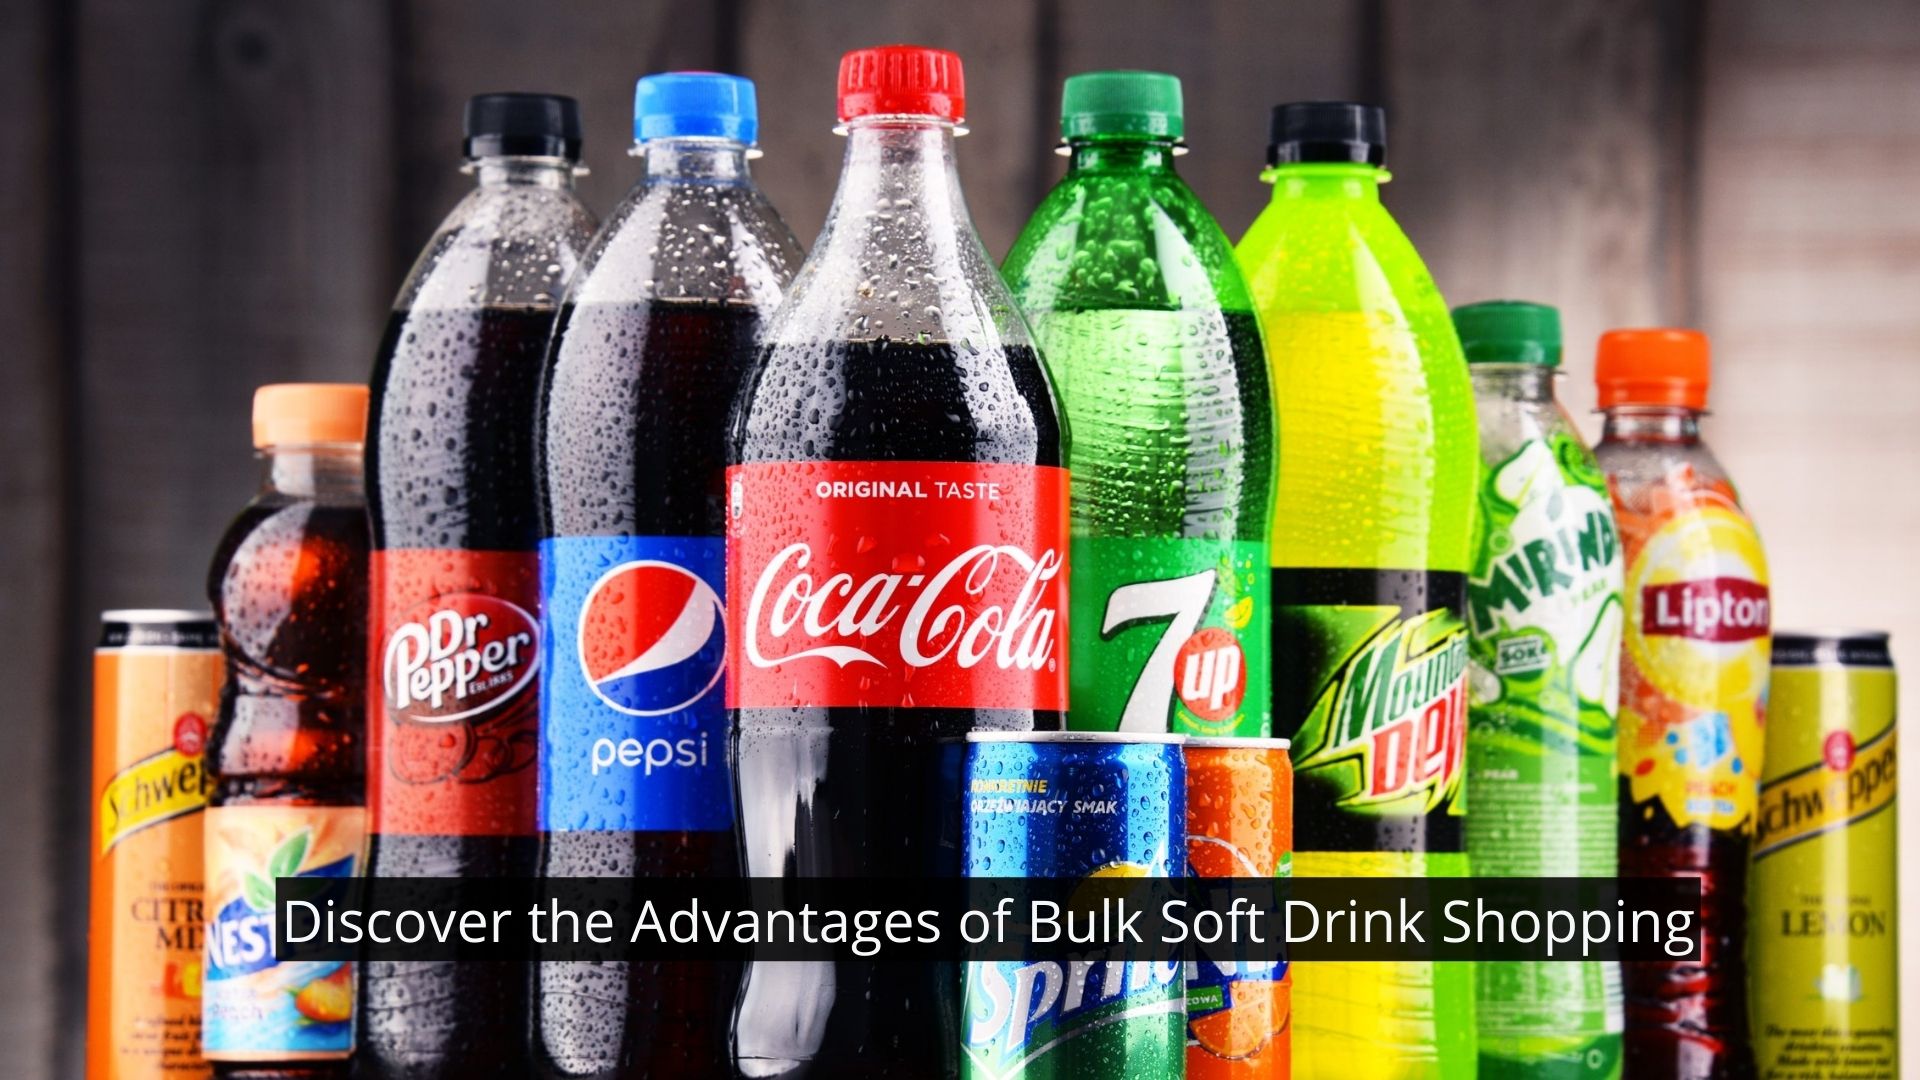 Discover the Advantages of Bulk Soft Drink Shopping